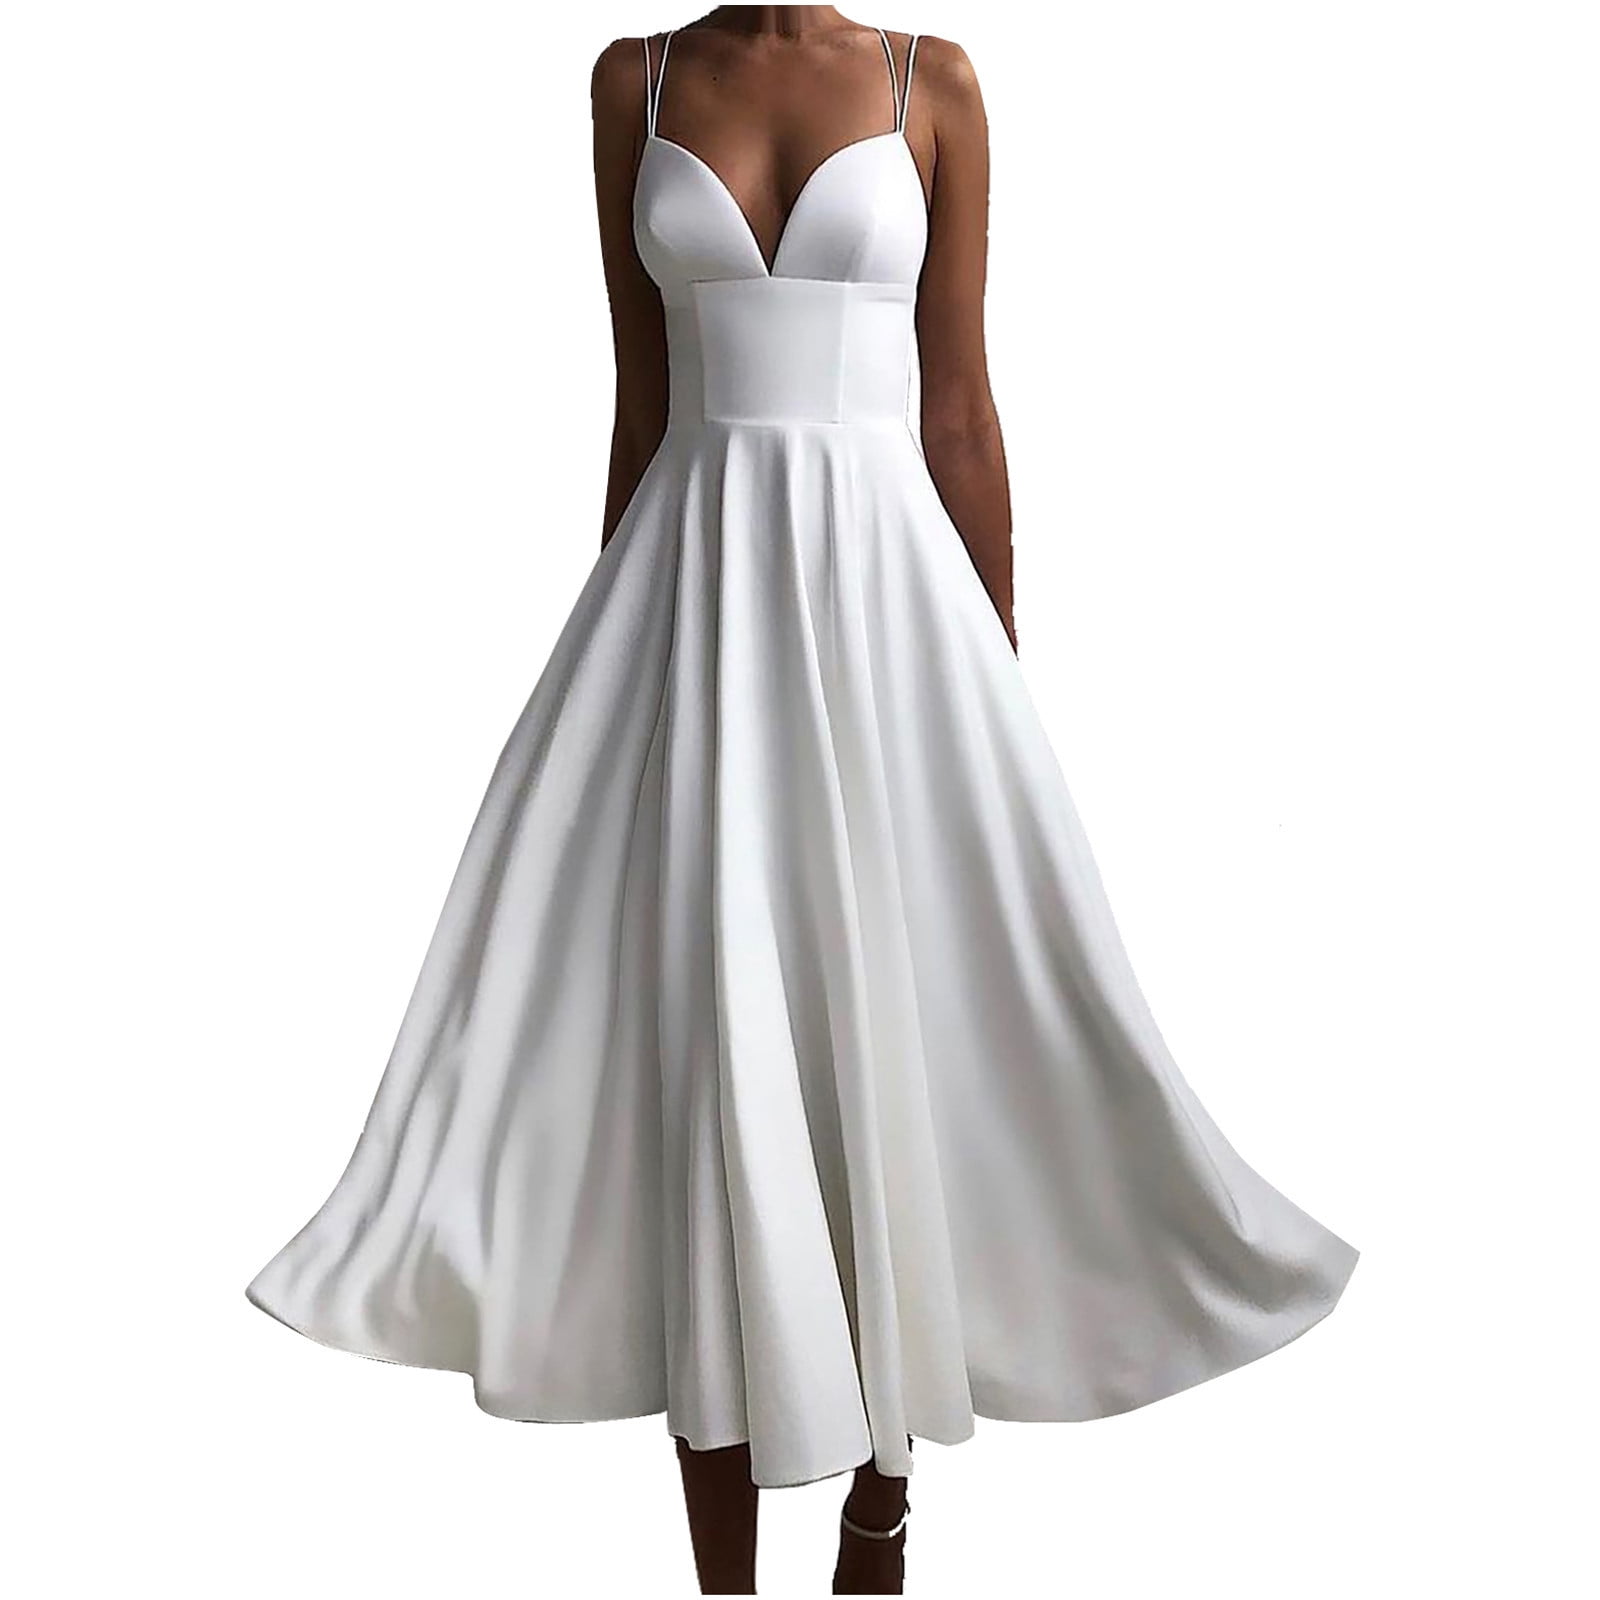 Finelylove Cruise Dress Cocktail Dresses For Woman A-line High-Low ...